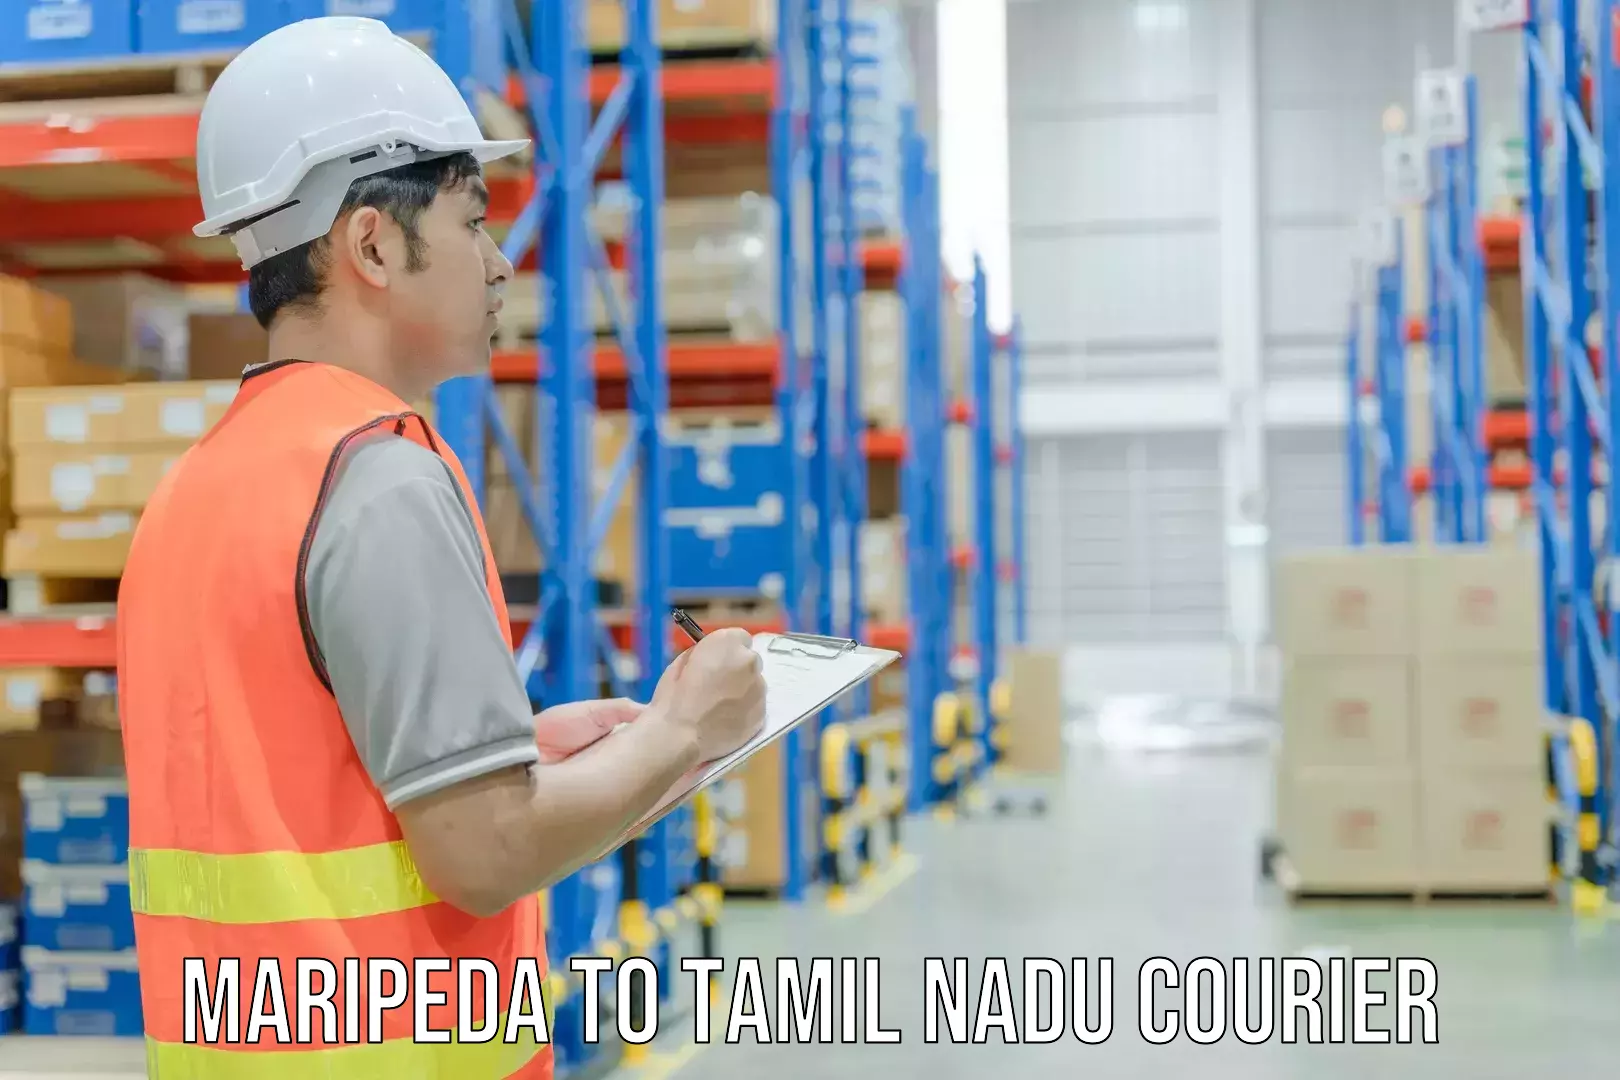 Courier service booking Maripeda to Thiruporur